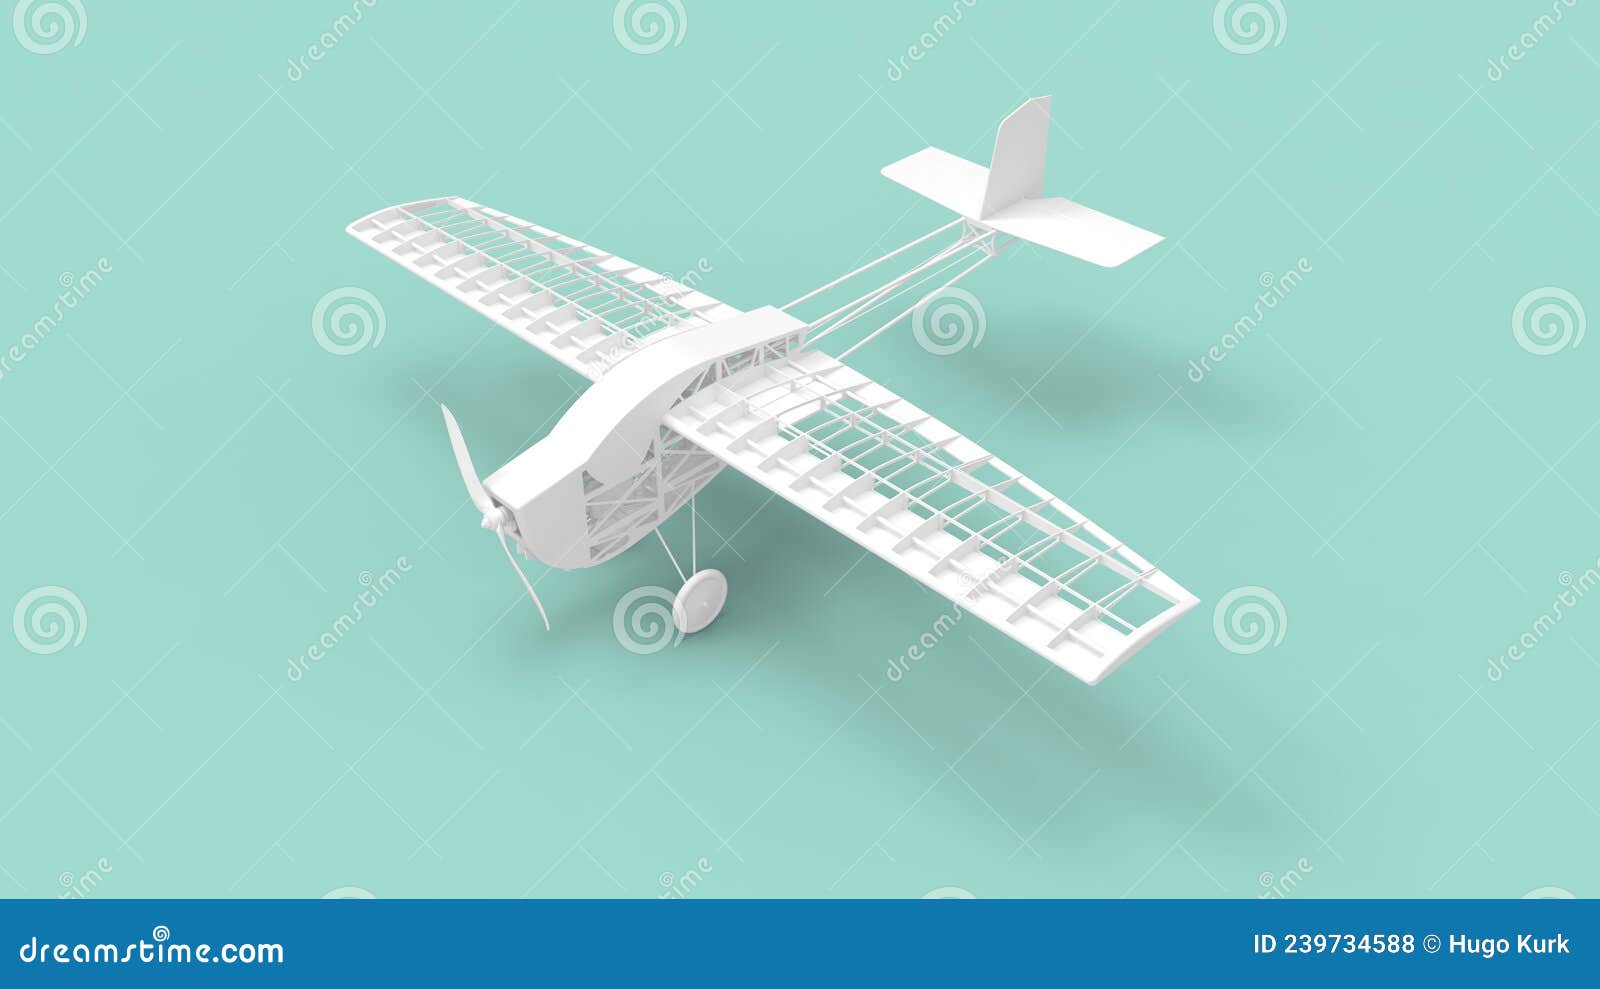 3d rendering of the casis of a small model propellor airplane chasis.  in studio background.